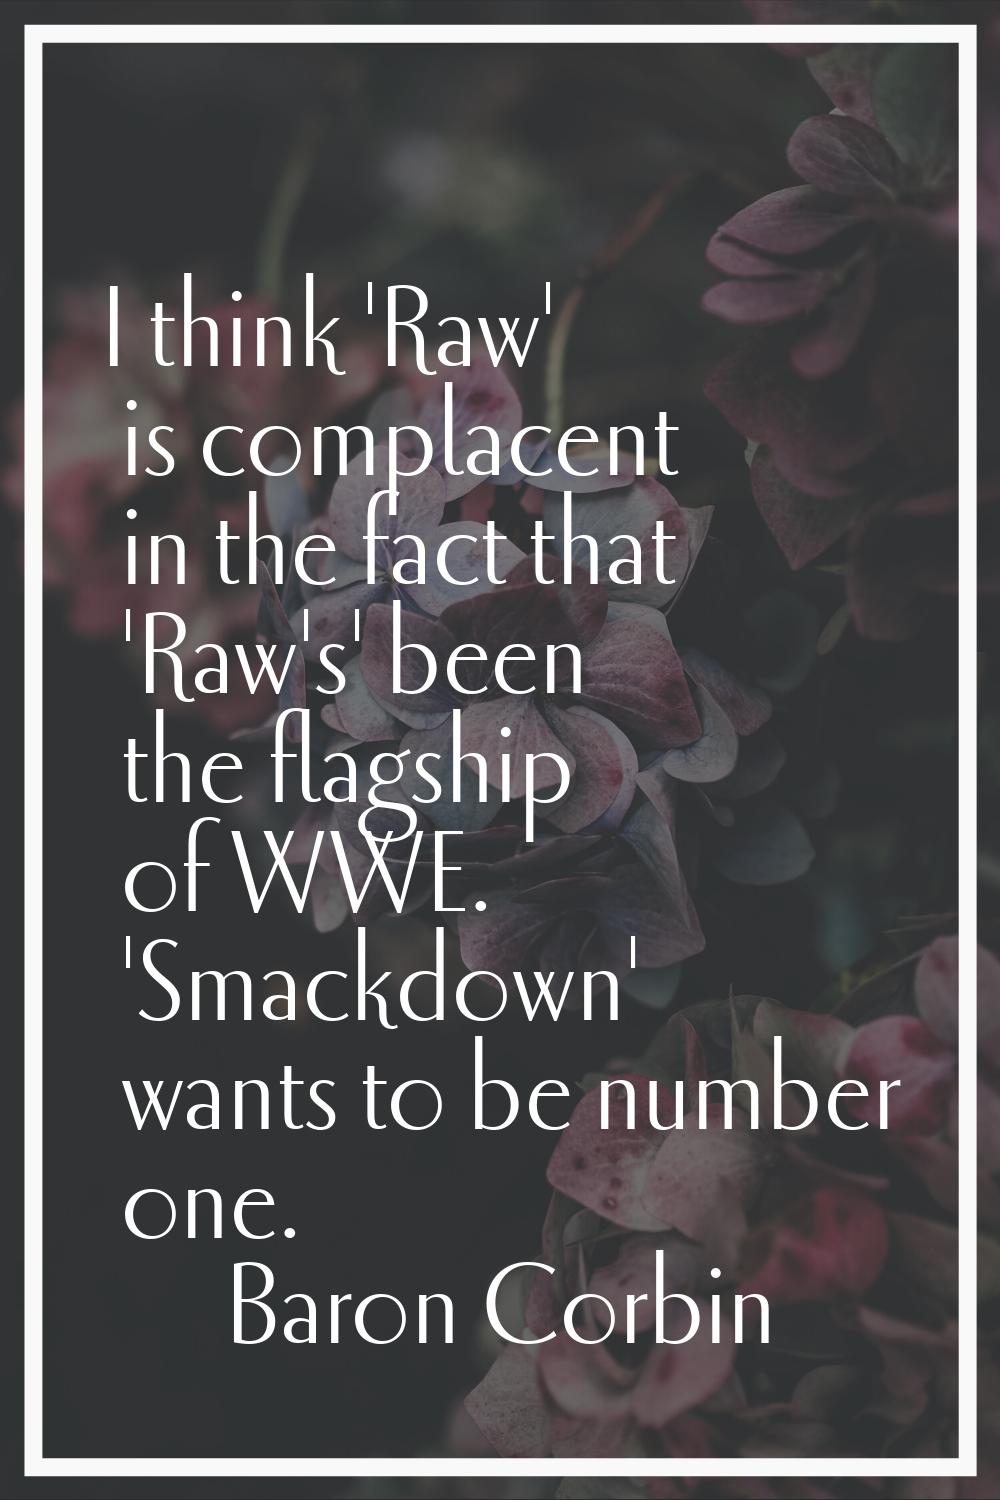 I think 'Raw' is complacent in the fact that 'Raw's' been the flagship of WWE. 'Smackdown' wants to